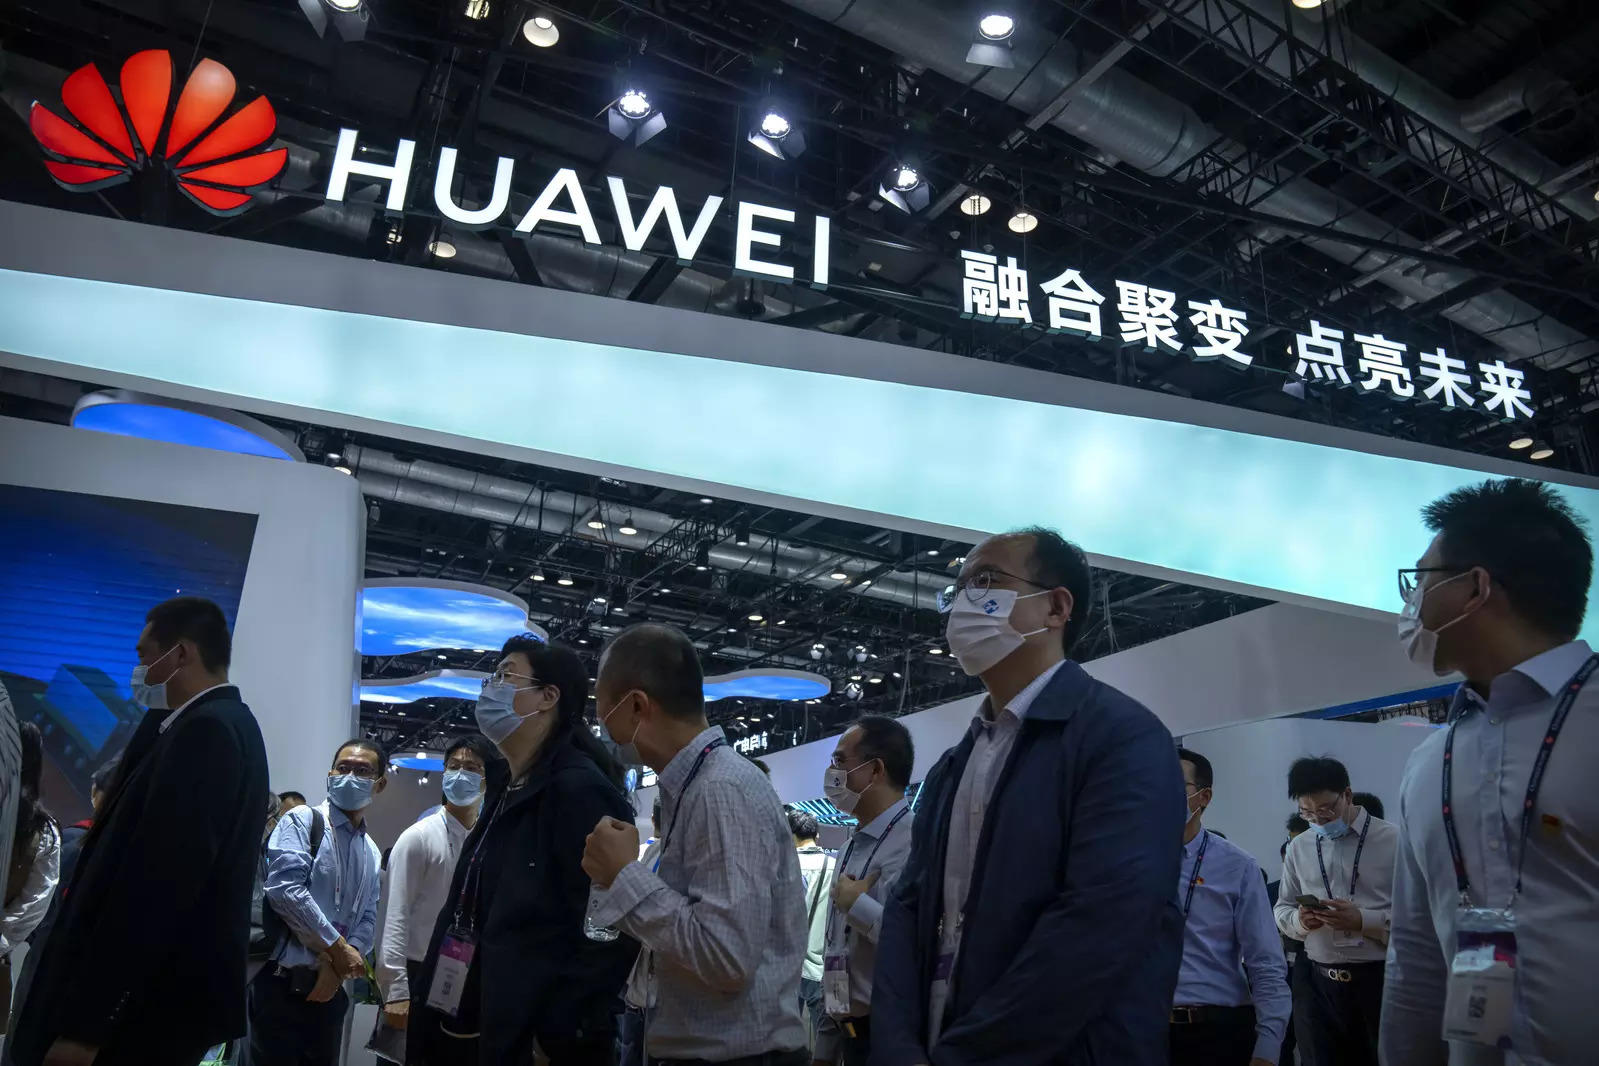 Huawei separates Russia business from other CIS countries